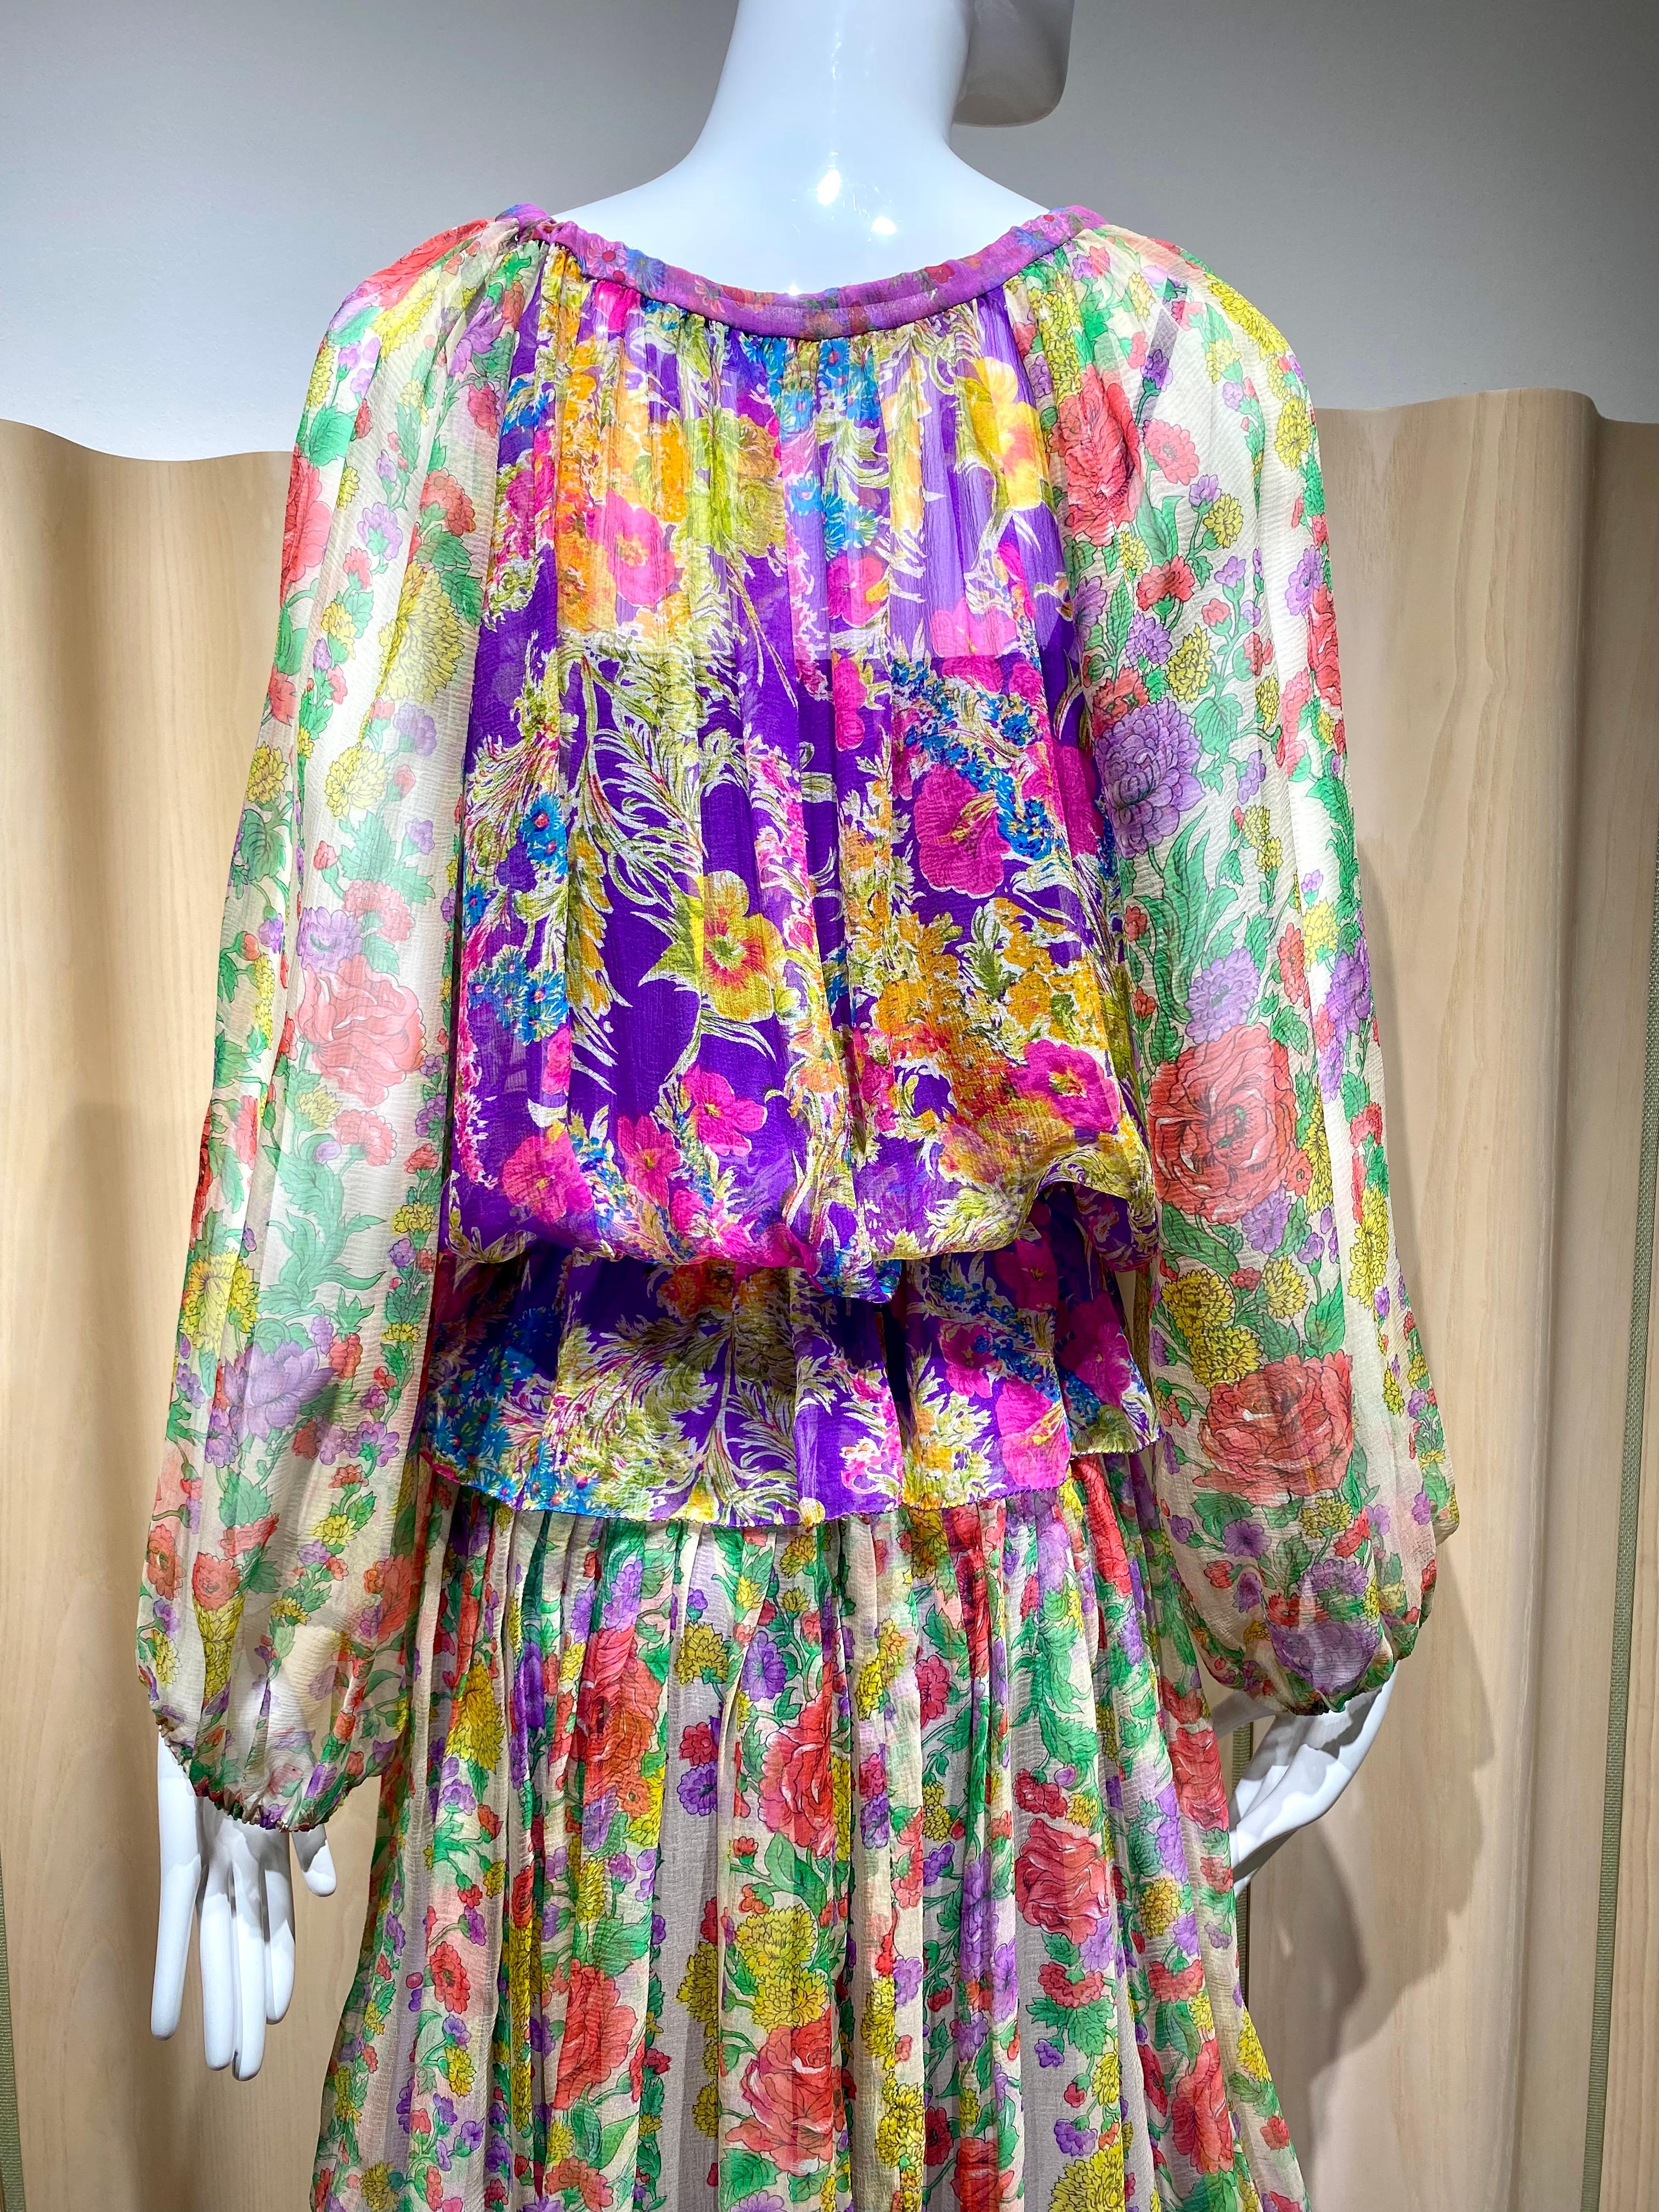 1970s Neiman Marcus made in france Floral print in purple, yellow, green and orange Silk crepe 2 pcs spaghetti strap dress with blouse.
Size: 4 for Dress/ Blouse fit size 6-8
Measurement for the Dress:
Bust:   / Waist:     / Hip:  
Blouse